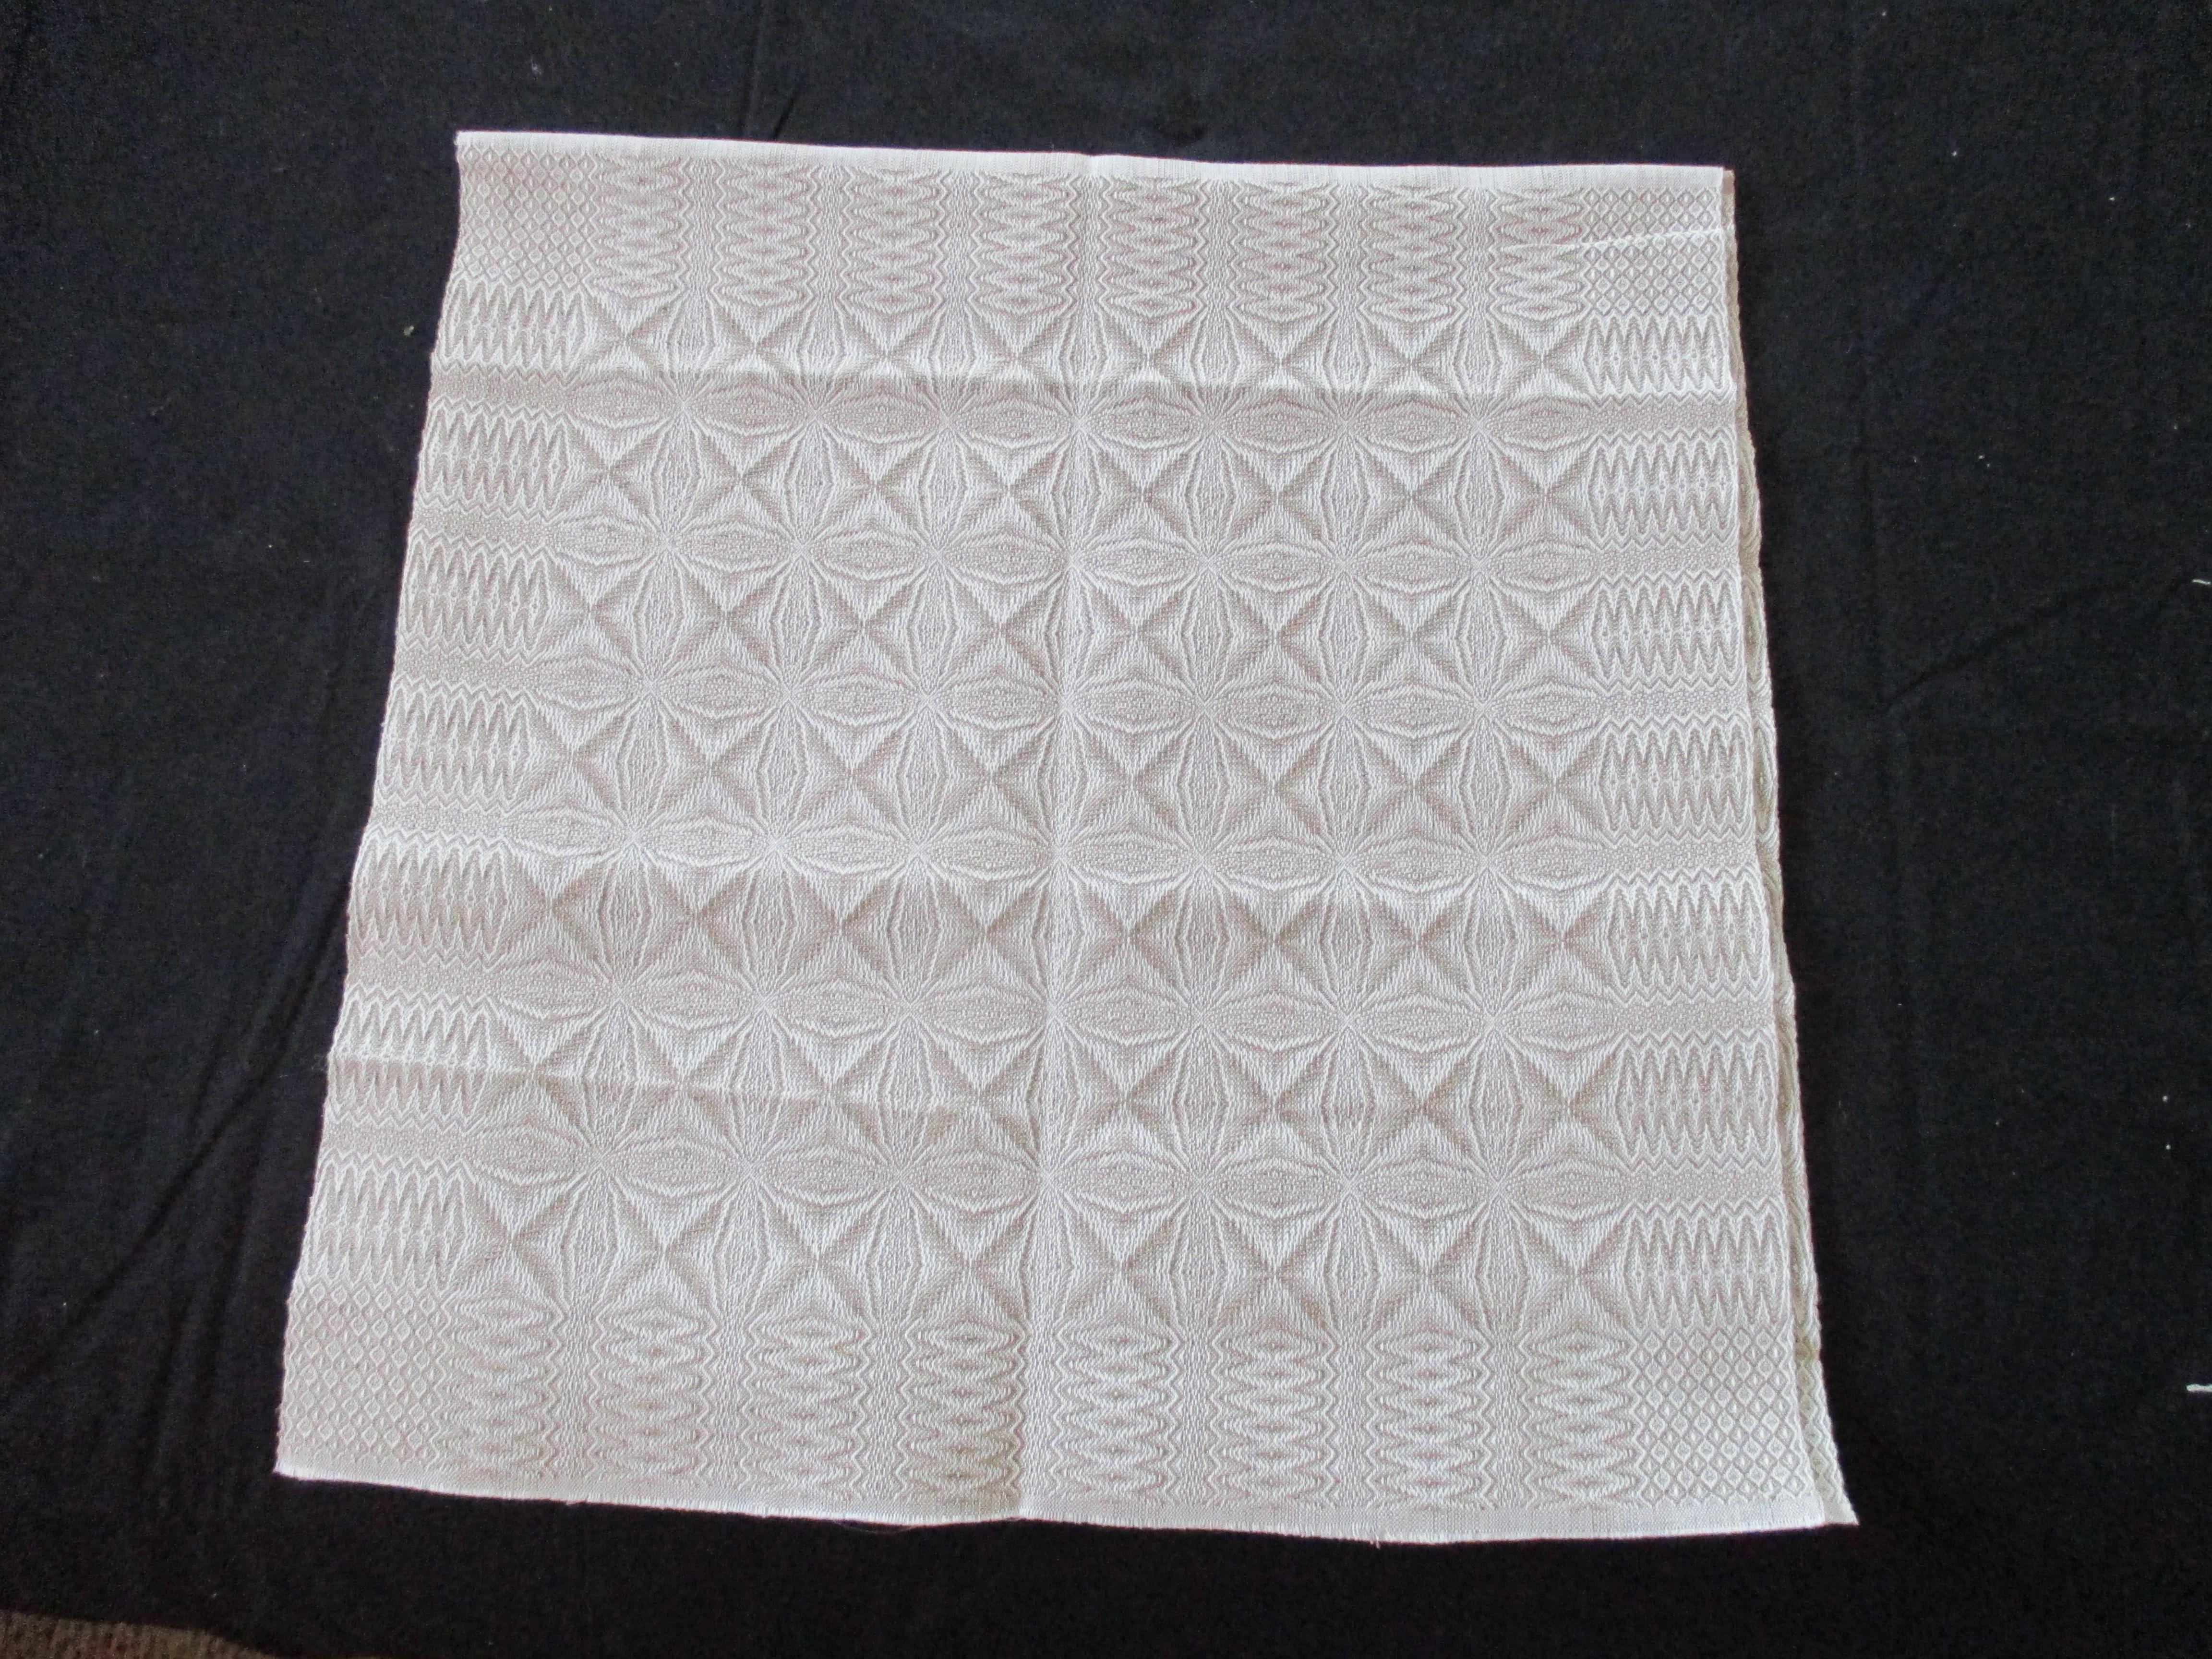 Vintage French Jacquard double sided tone on tone woven textile
Size: 73